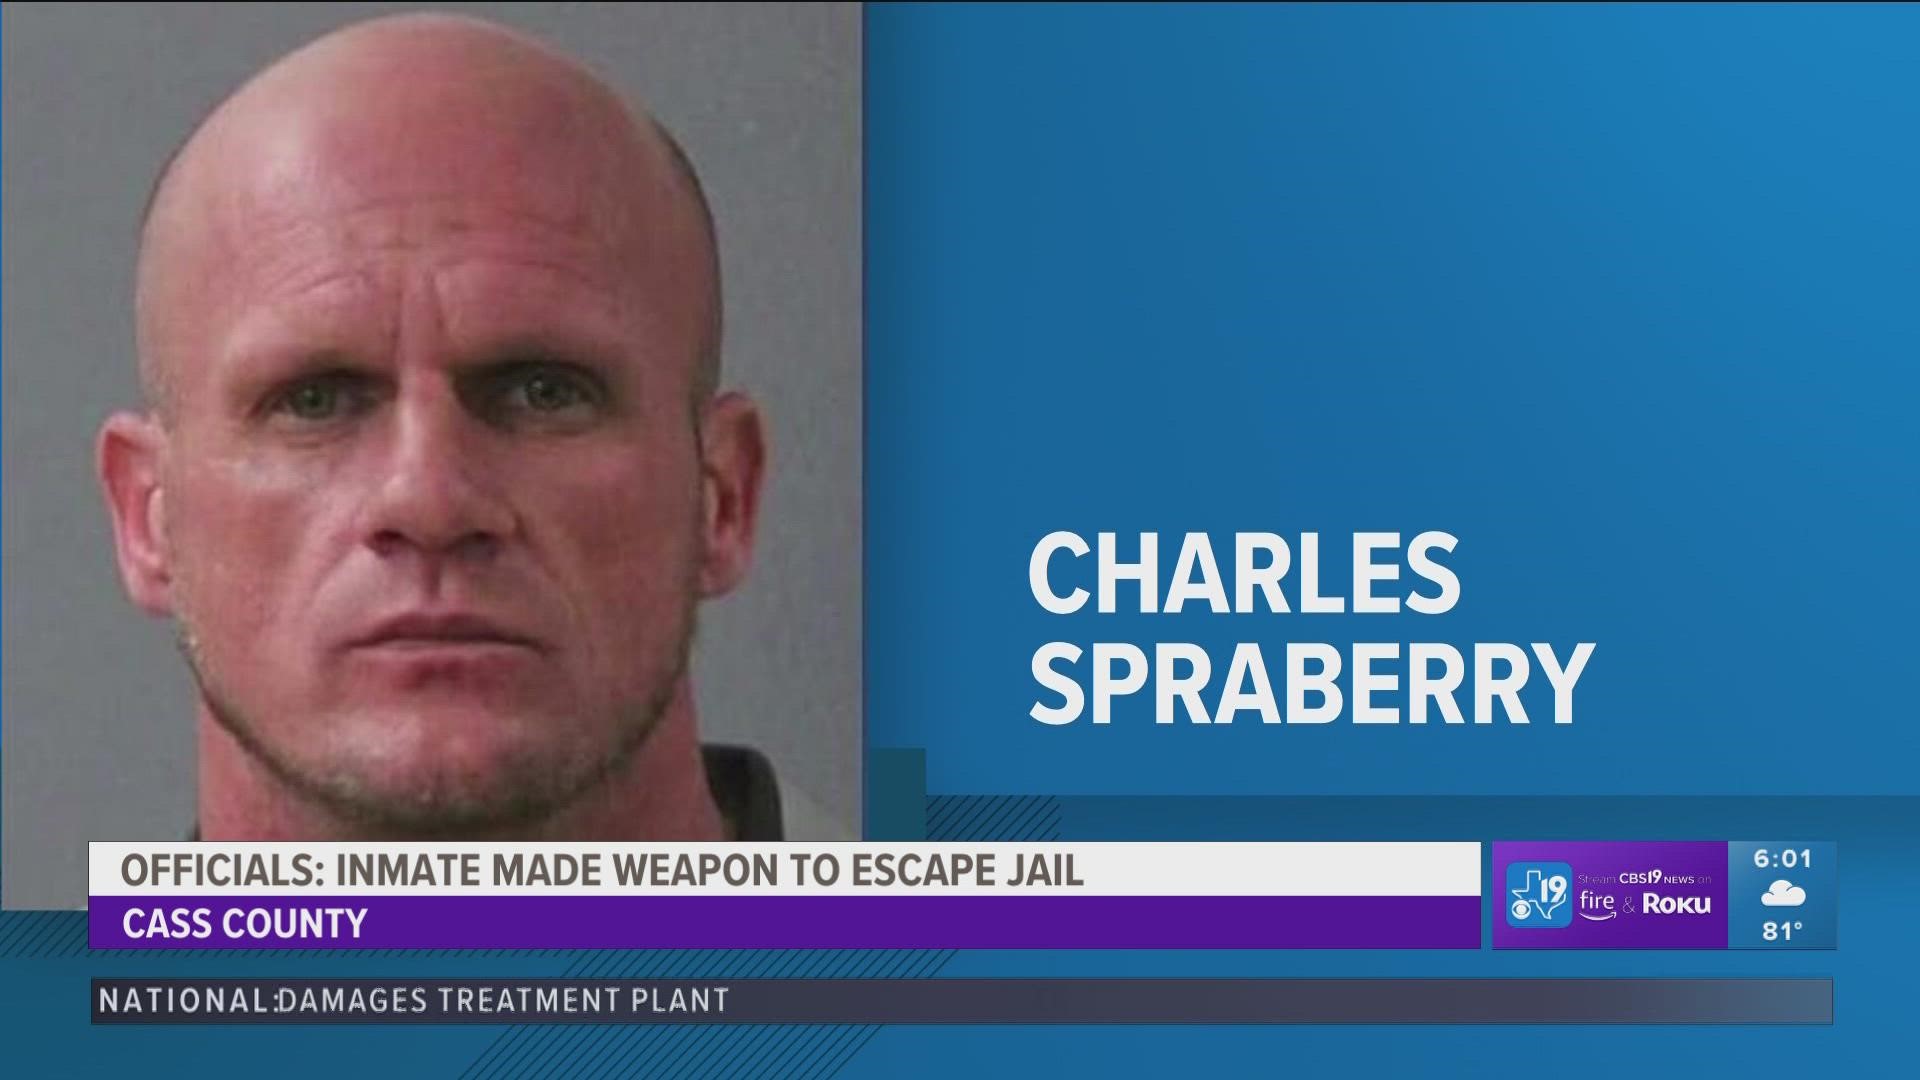 Charles Spraberry is 'armed and dangerous,' and is wanted for multiple felonies.